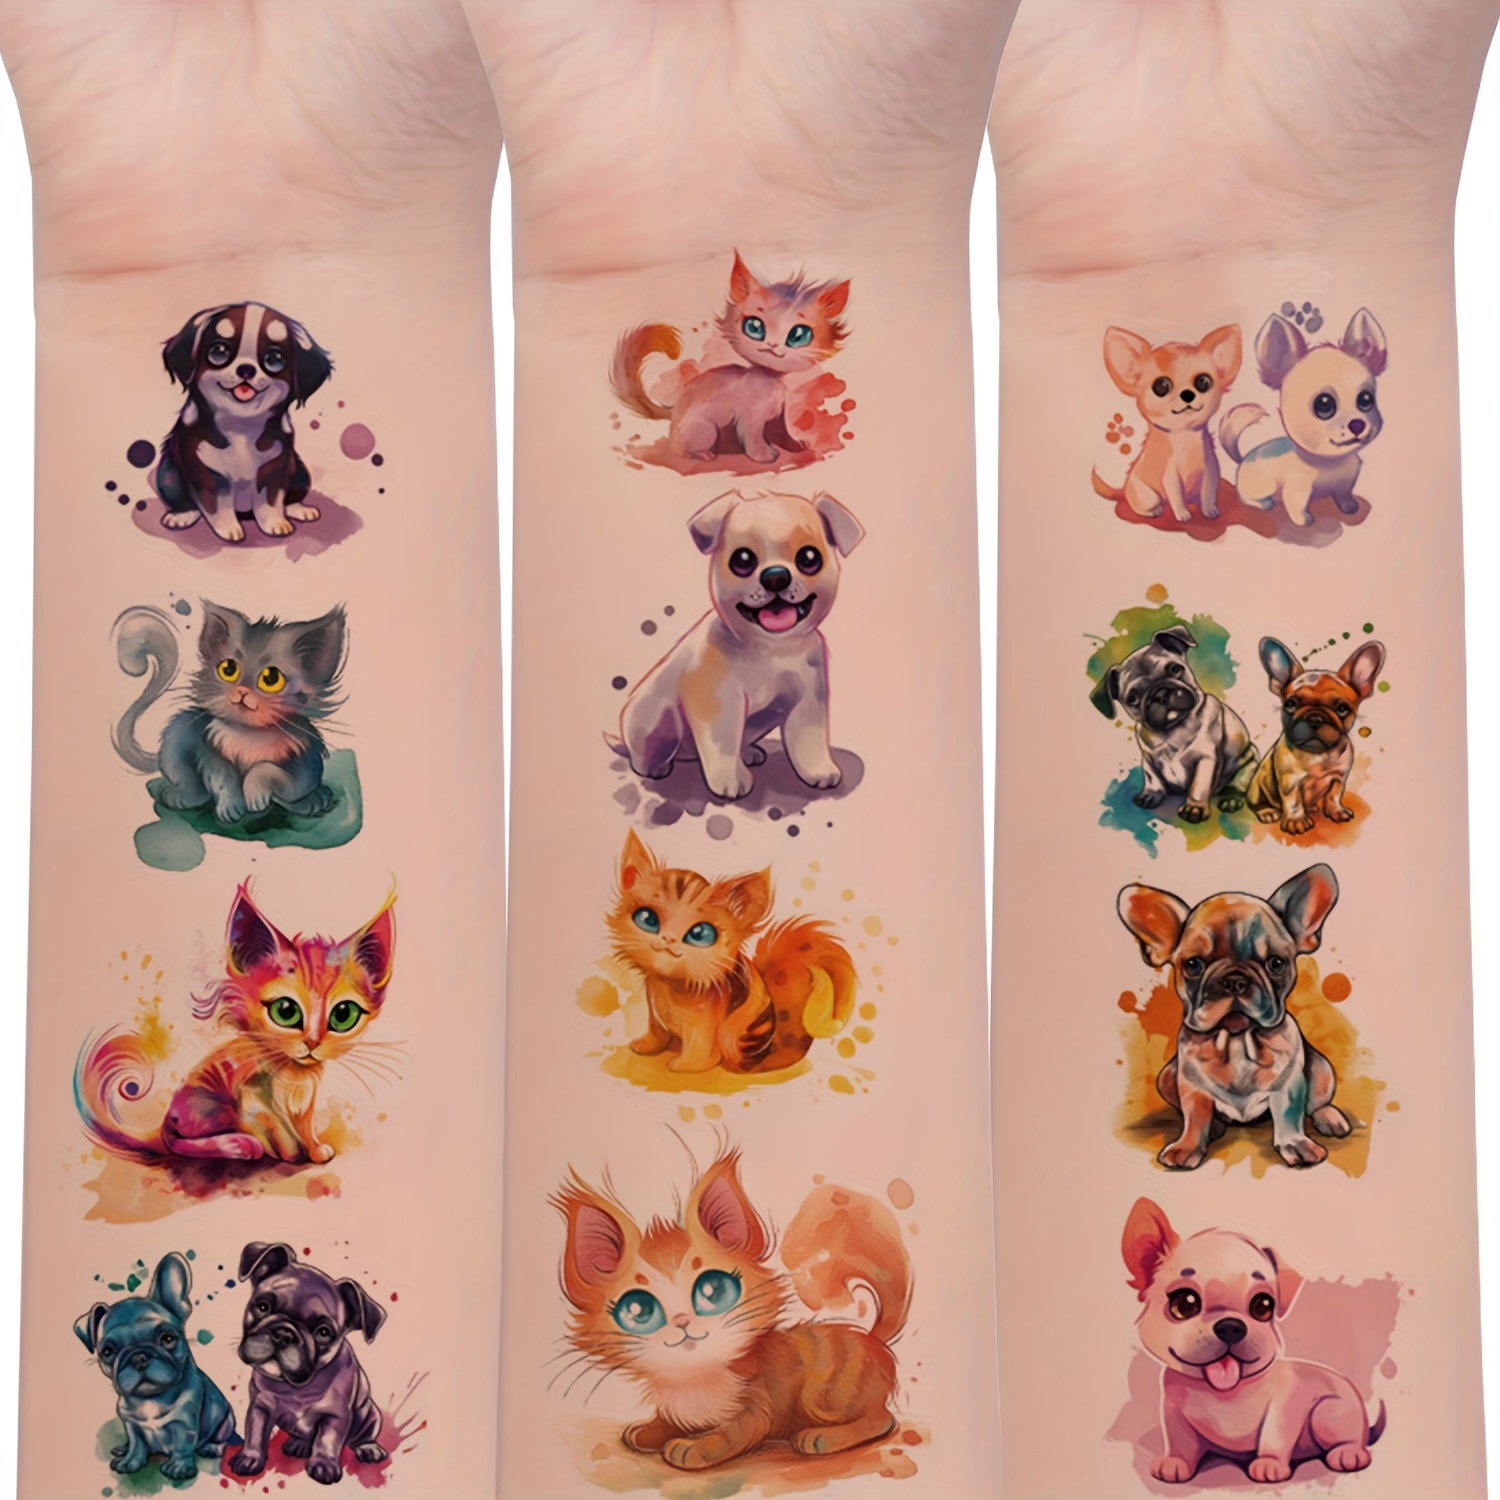 

10sheets (77 Patterns), Cartoon Anime Style Pet Dog Cat Elements Series Watercolor Patterns, Birthday Gift Fun Art Fake Tattoo Stickers, Waterproof Lasting For 2-5 Days